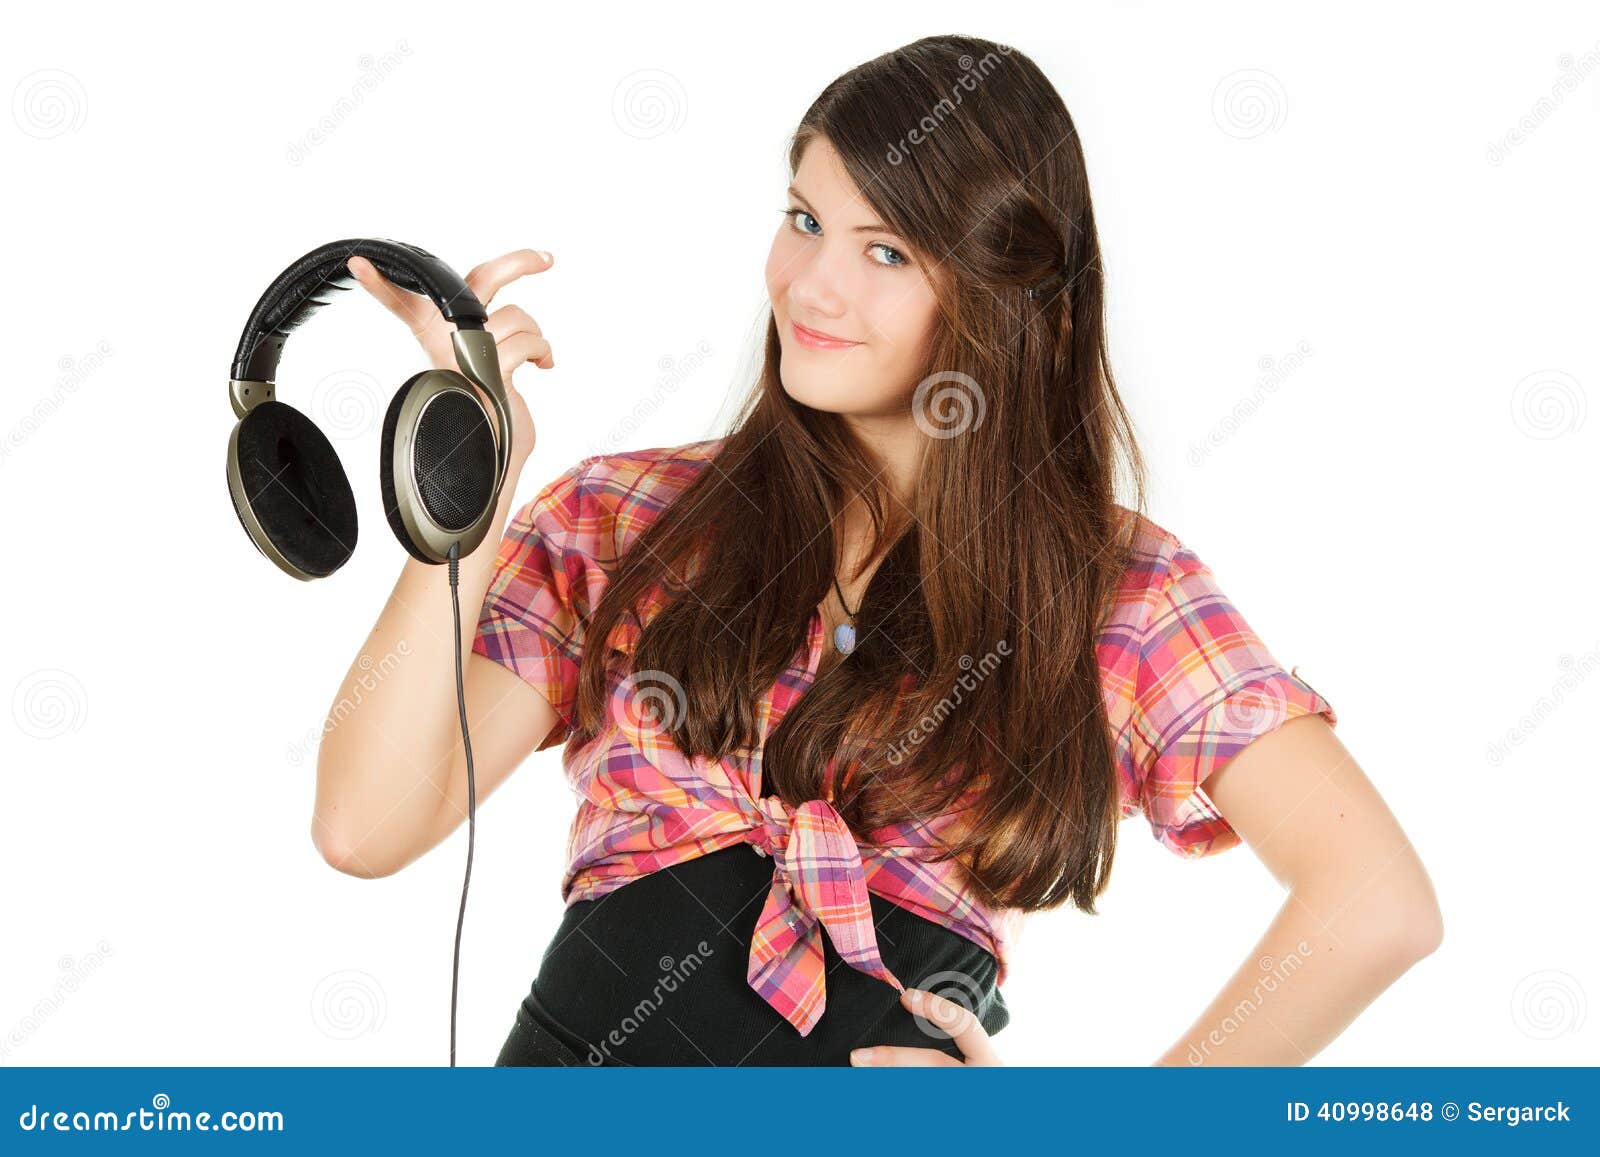 A smiling happy girl holds headsets in a hand, isolated on a white background